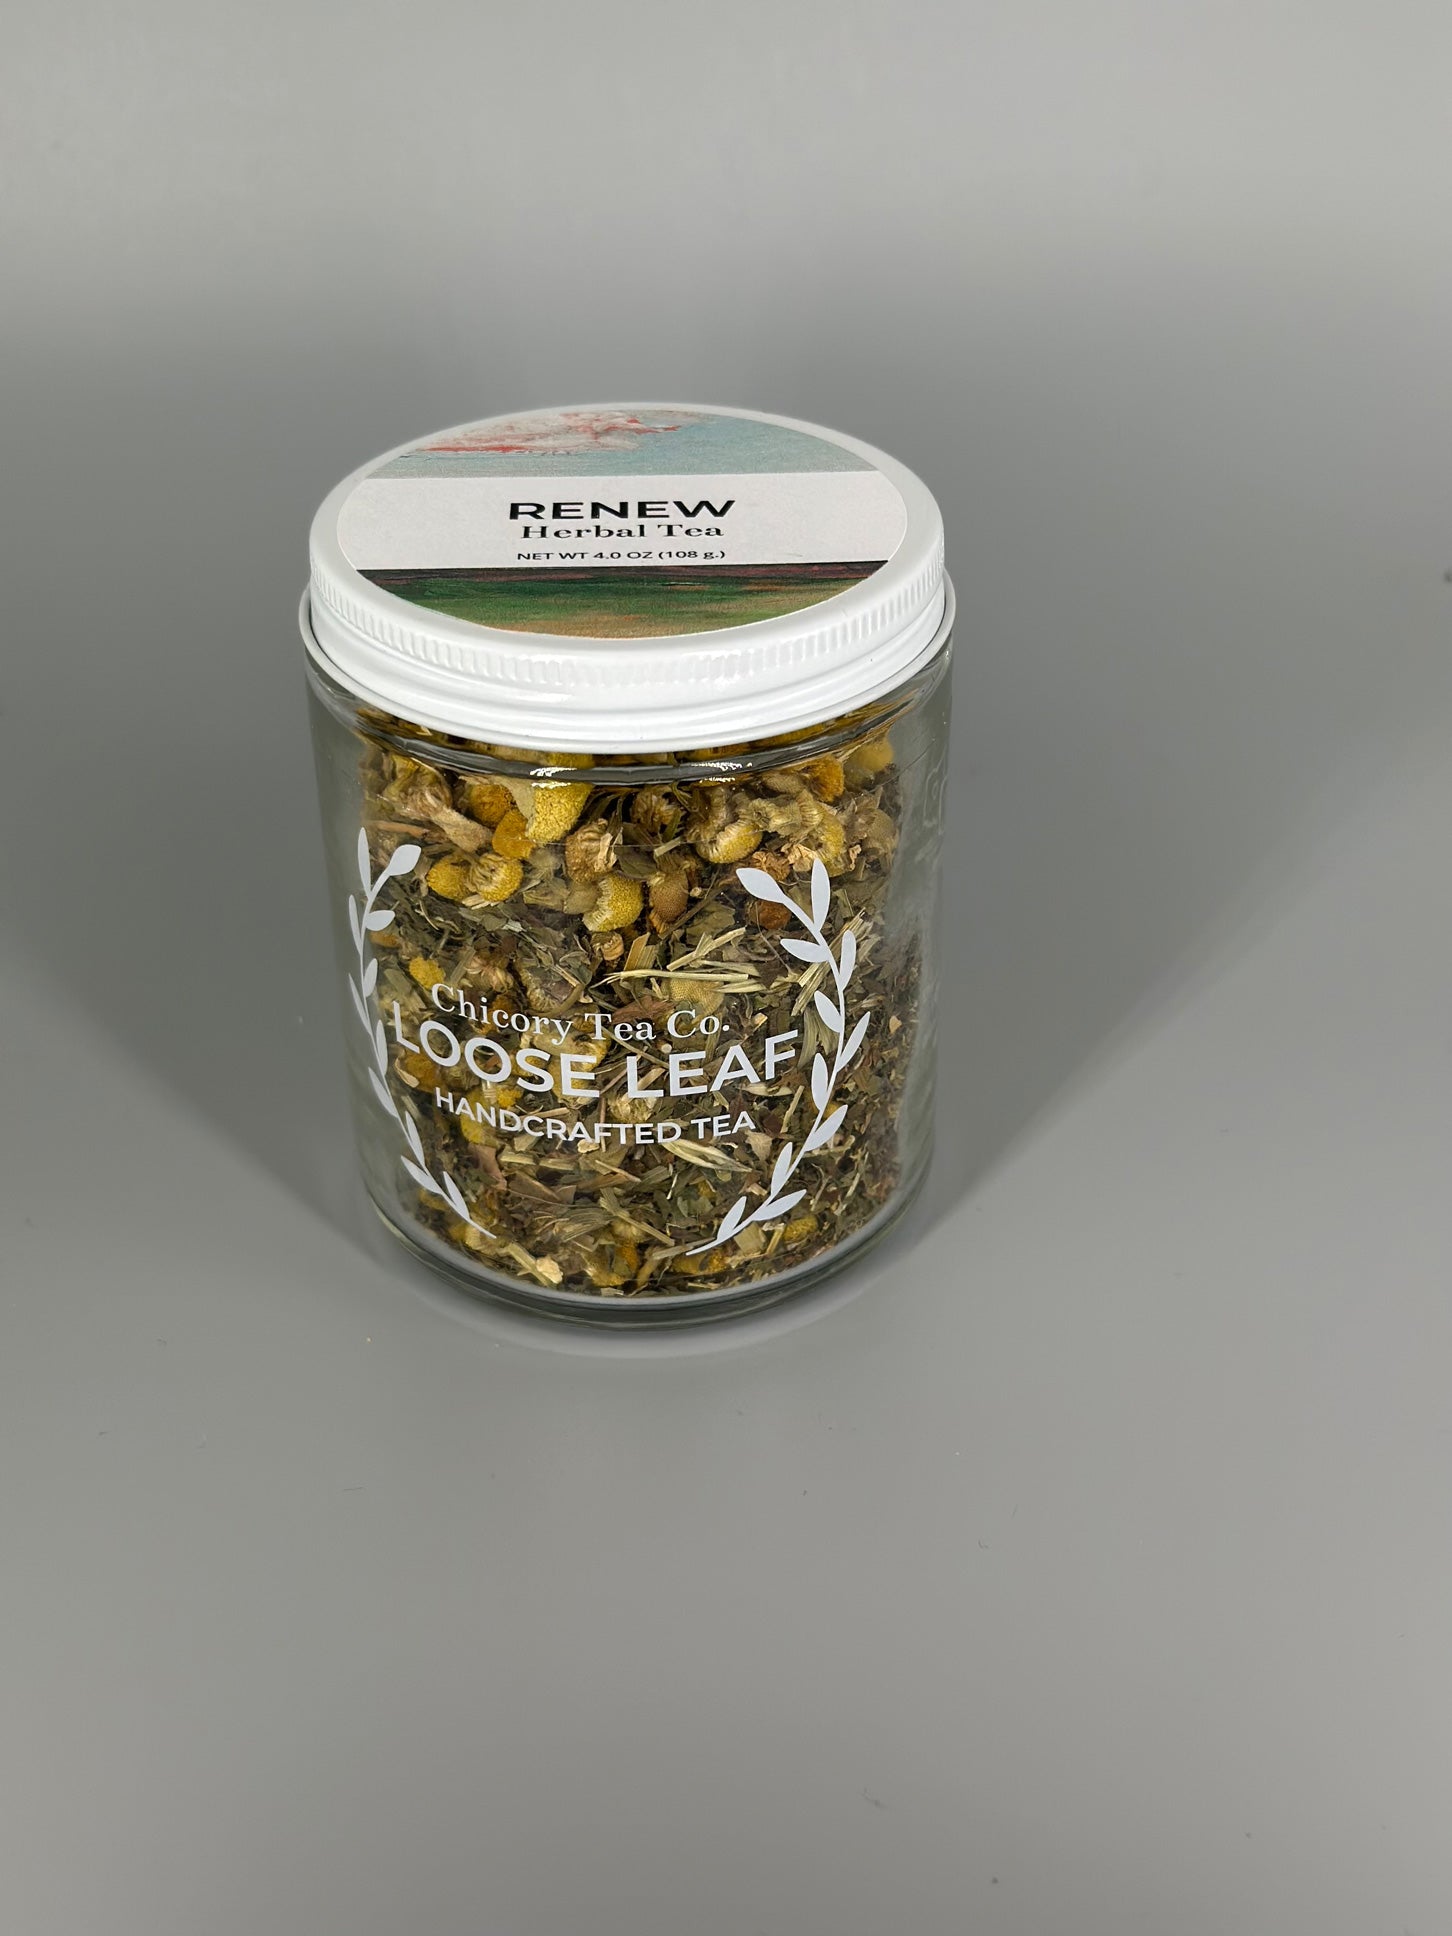 Chicory Tea Co.'s Renew Herbal Tea in the jar, view from front